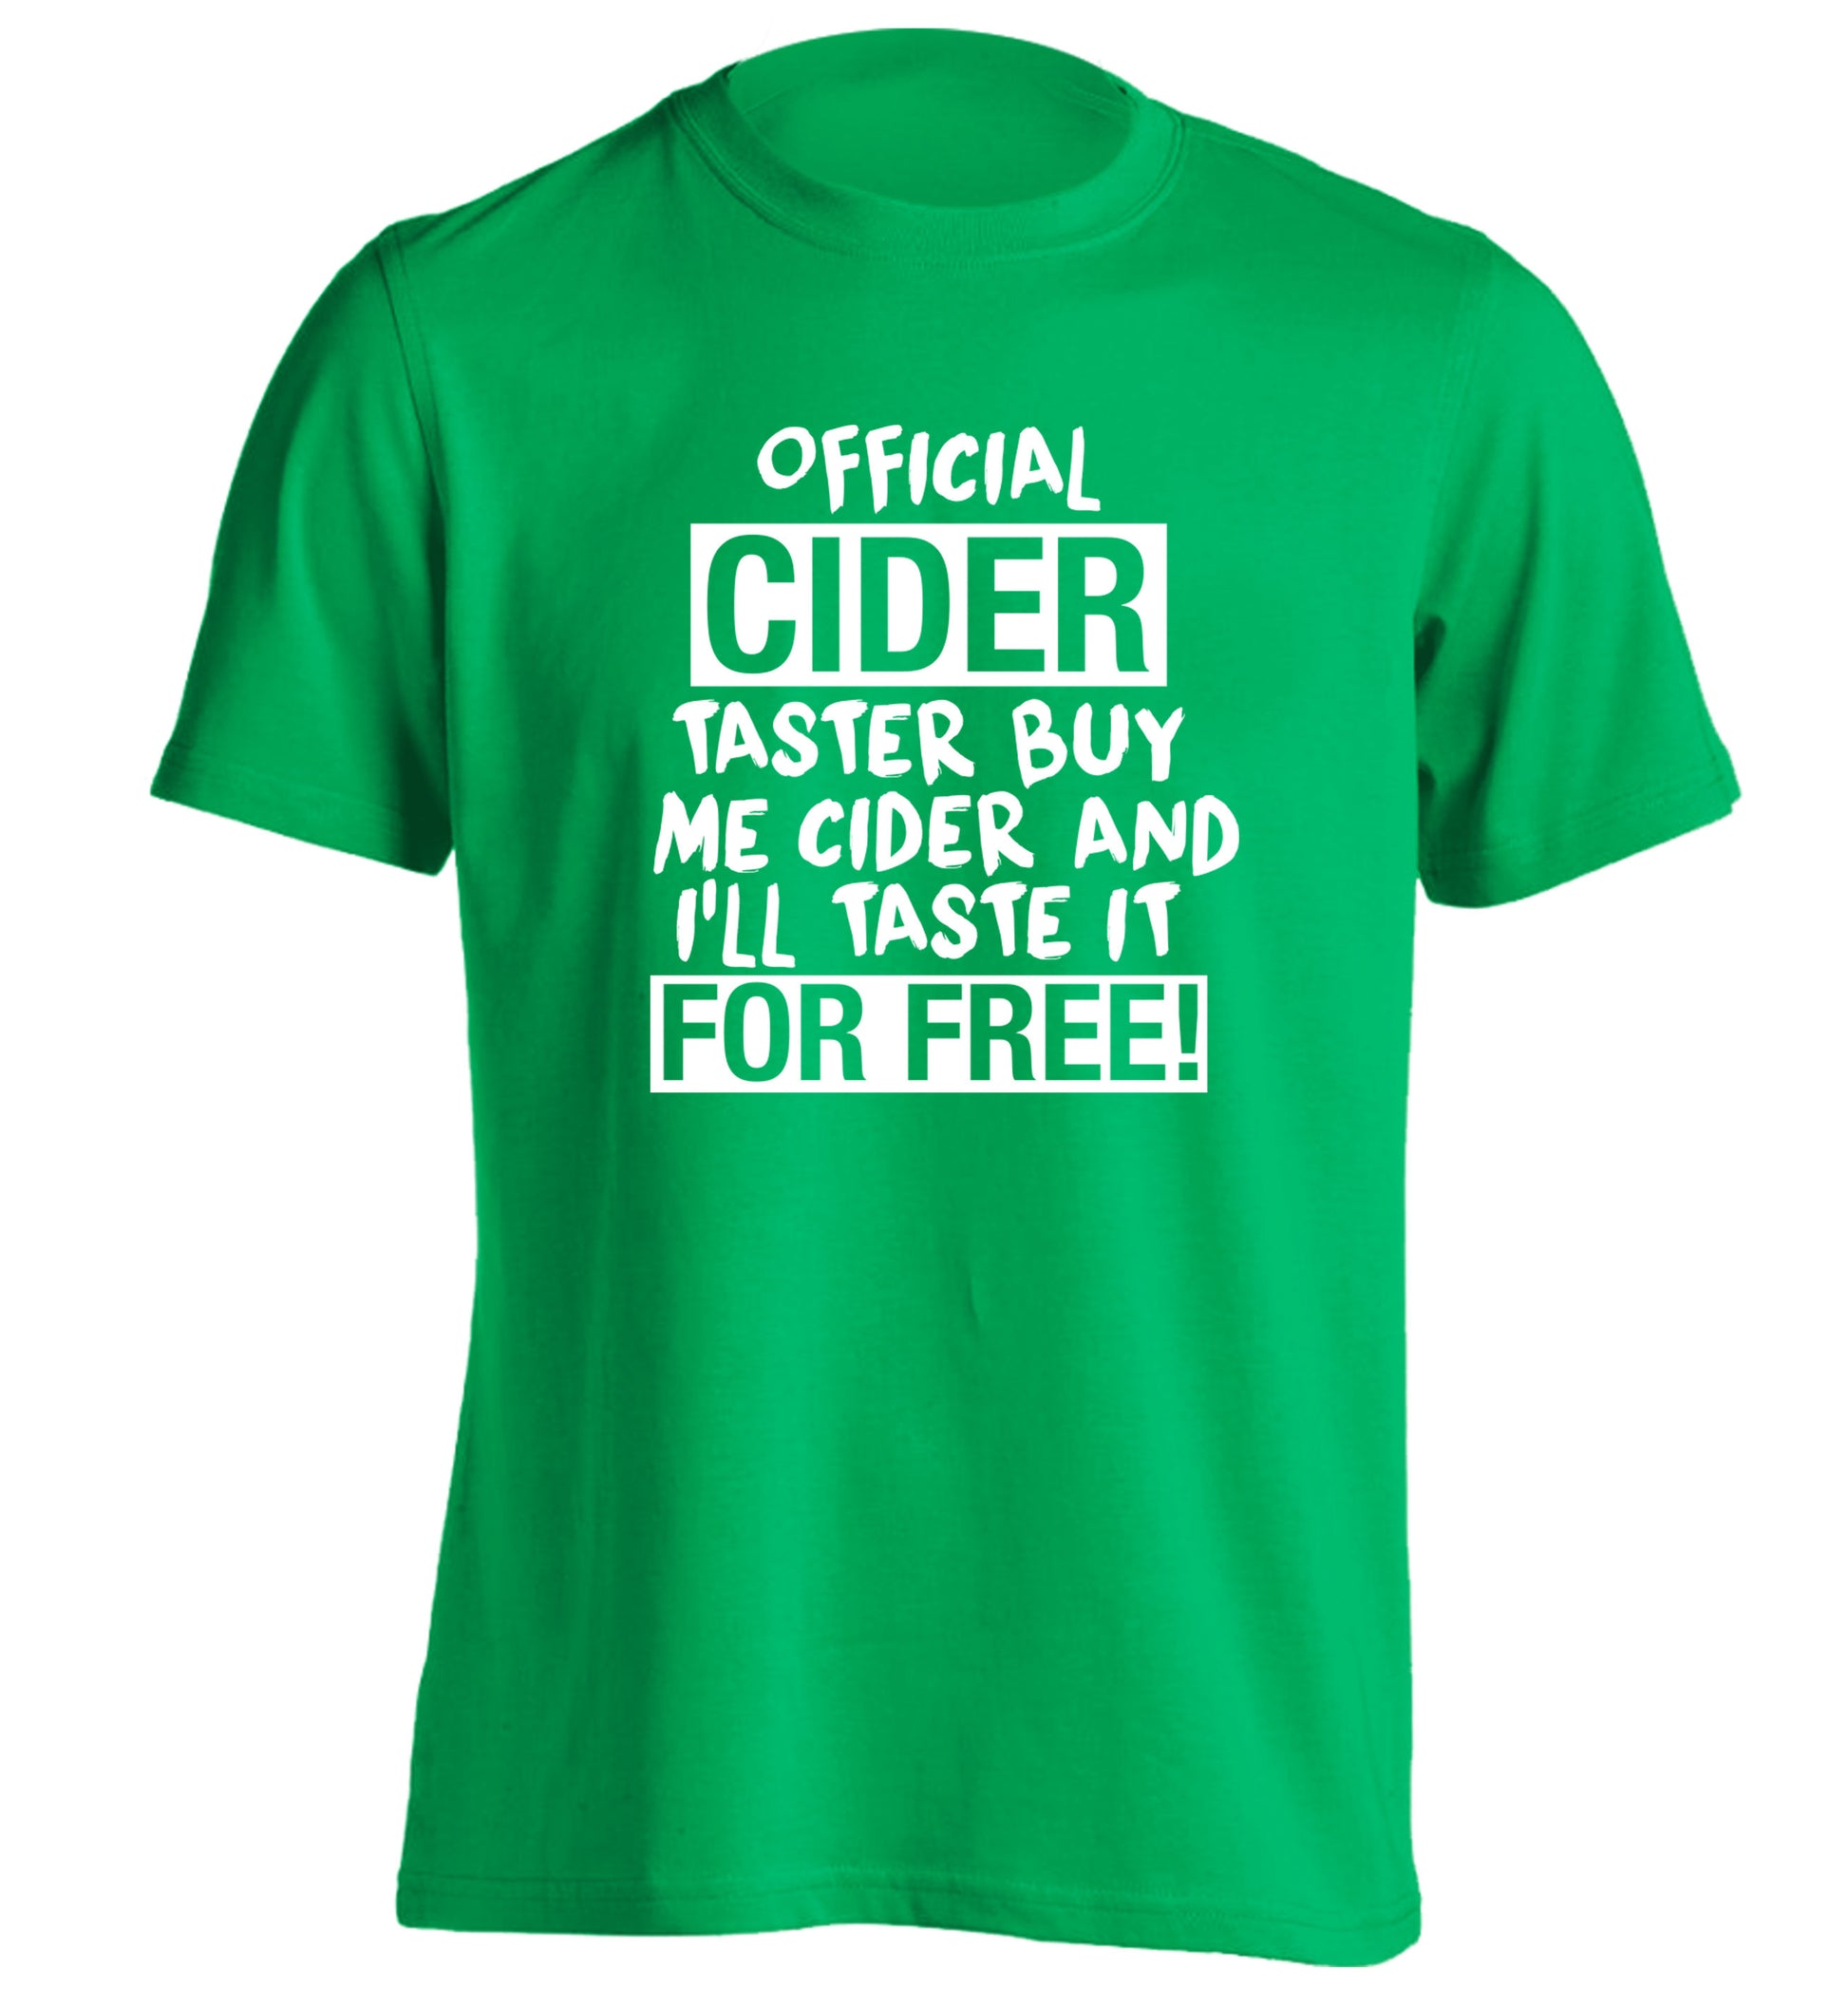 Official cider taster buy me cider and I'll taste it for free! adults unisex green Tshirt 2XL